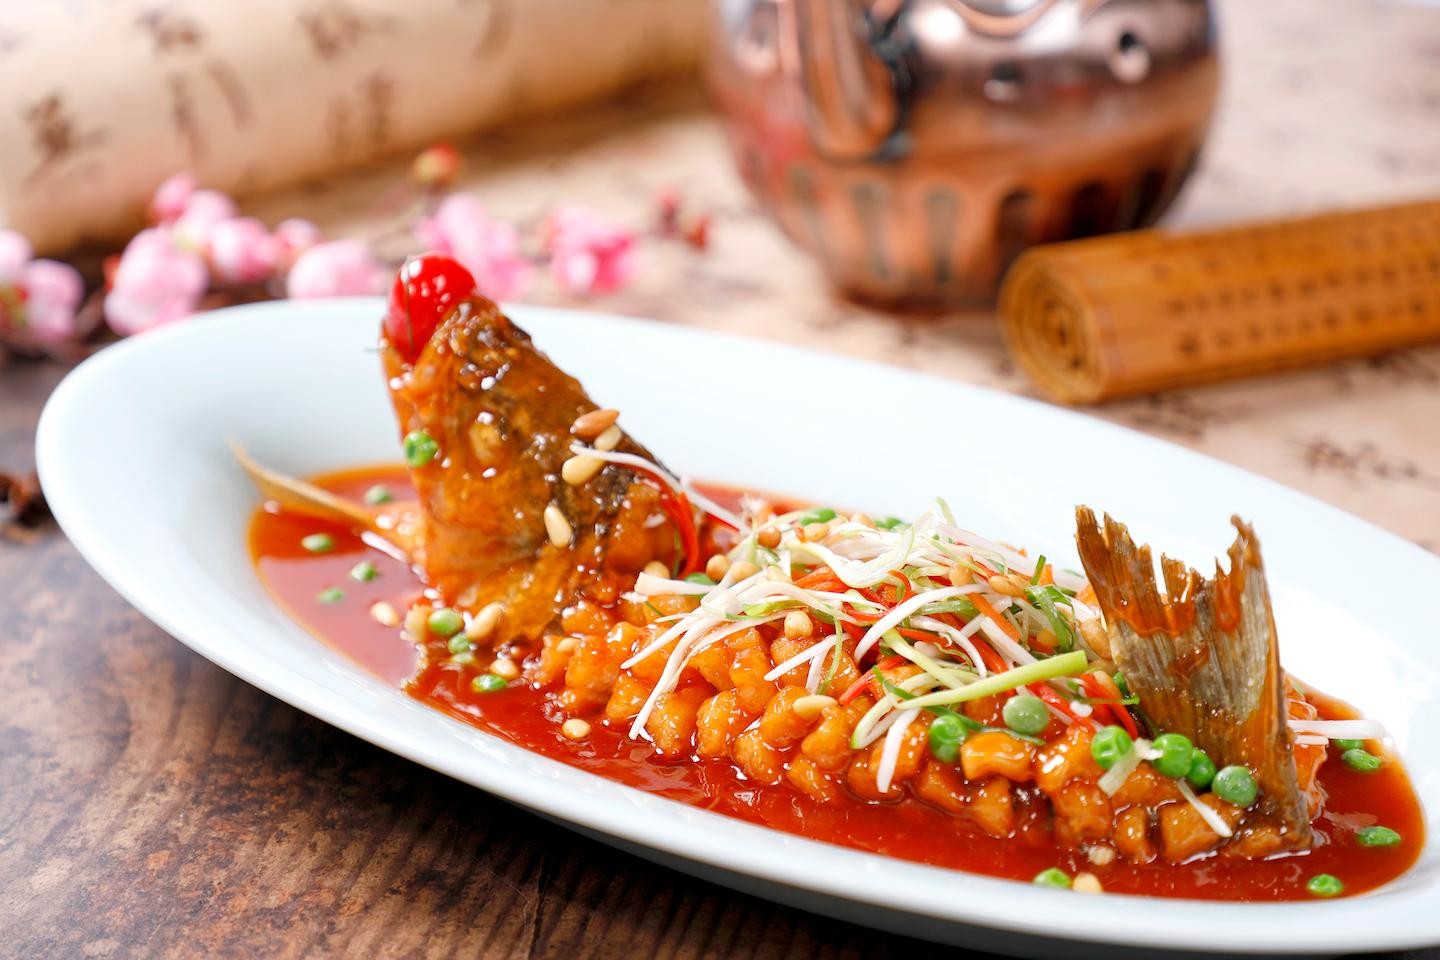 Crispy Sweet and Sour Sea Bass with Pine Nuts 松鼠鱼